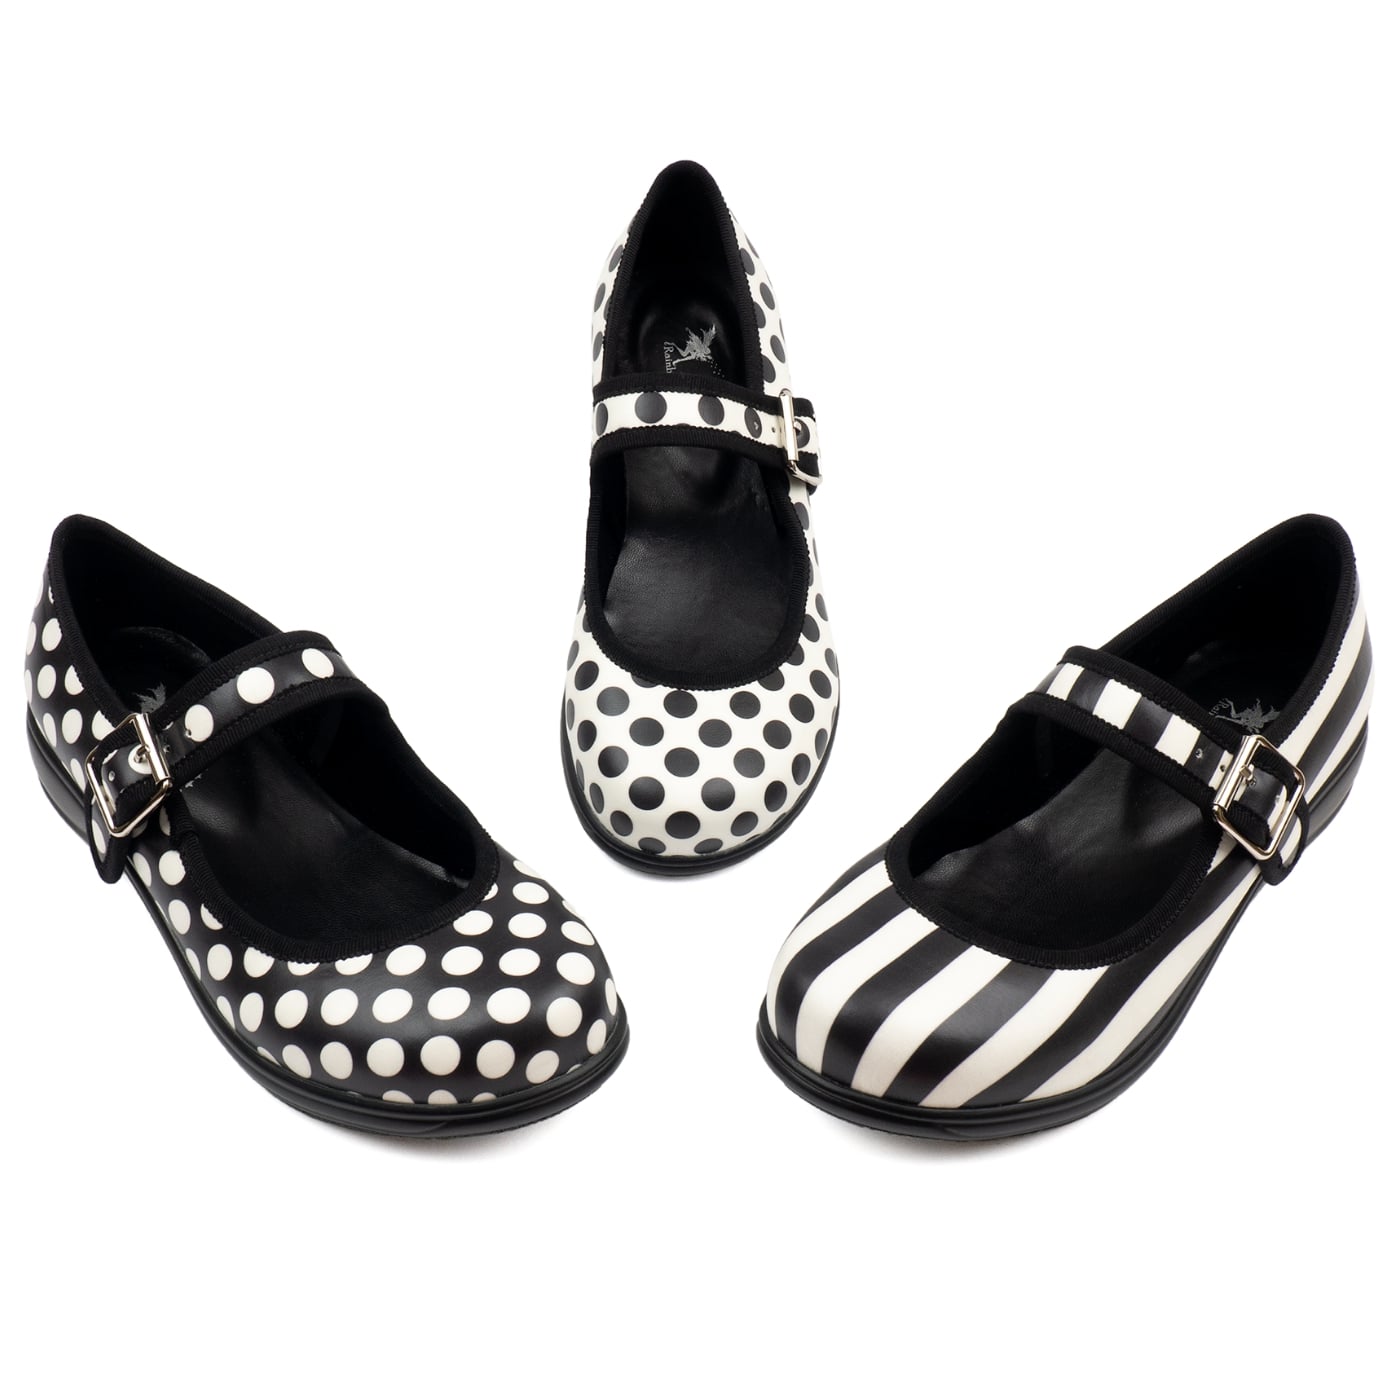 Monochrome Mary Janes by RainbowsAndFairies.com (Black & White - Polka Dots - Stripes - Mismatched Shoes - Shoes - Pair & A Spare) - SKU: FW_MARYJ_MONOC_ORG - Pic 01